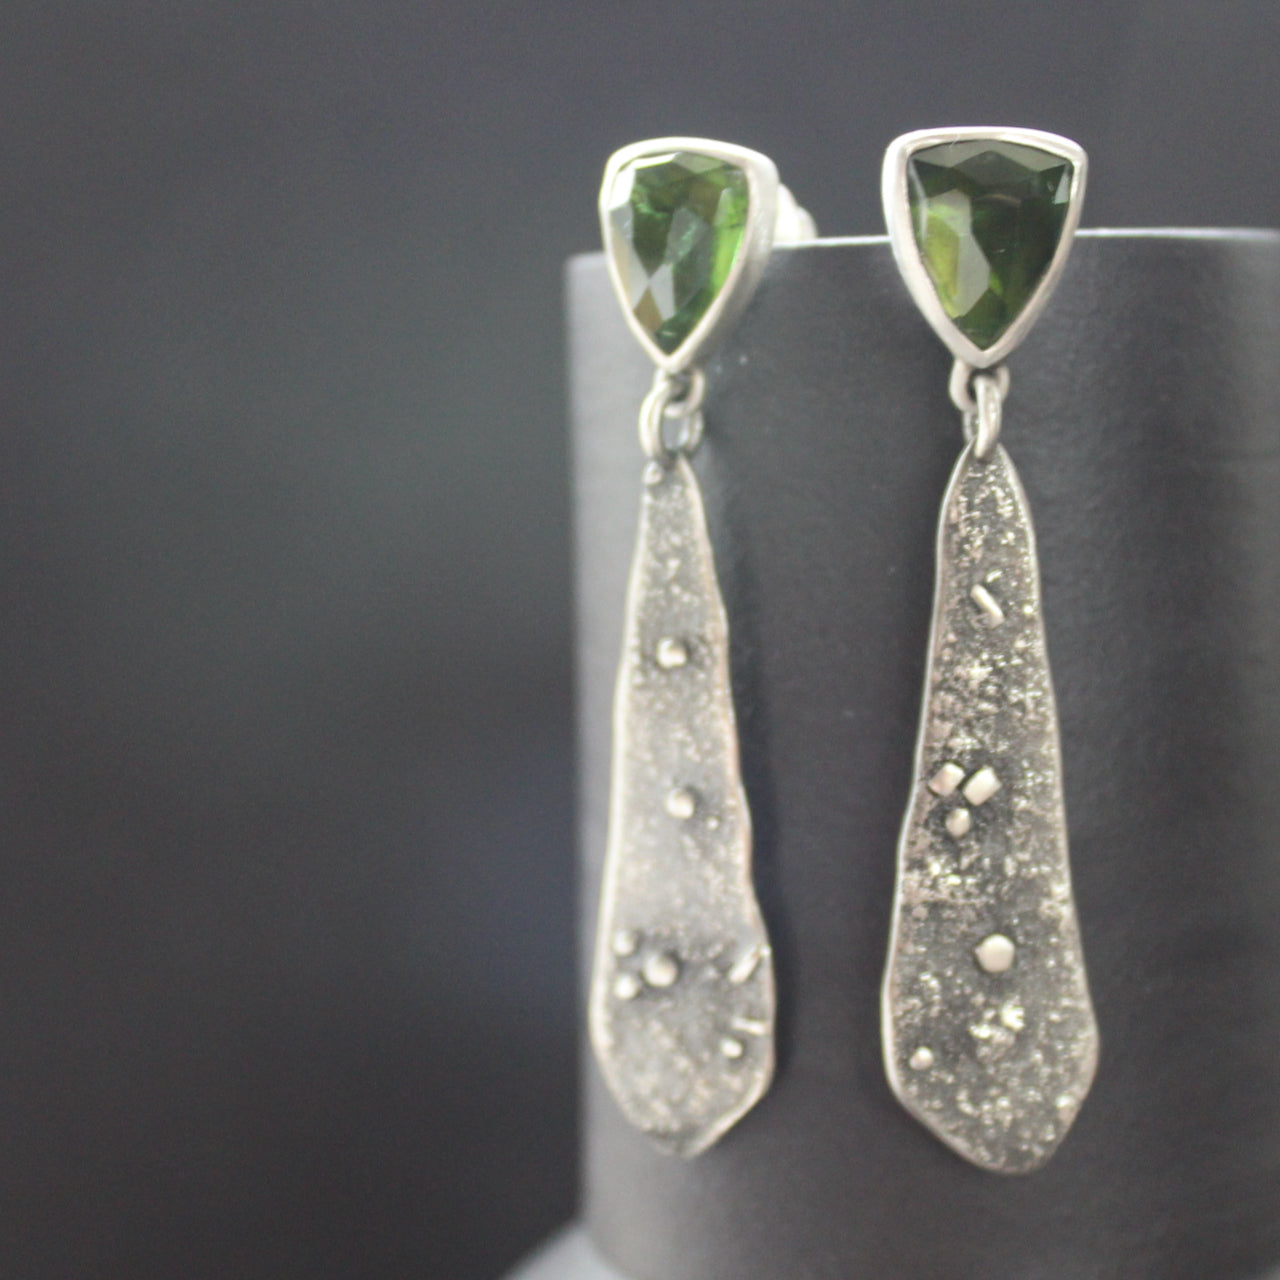 a pair of textured silver earrings with a dark green stone by jeweller Carin Lindberg